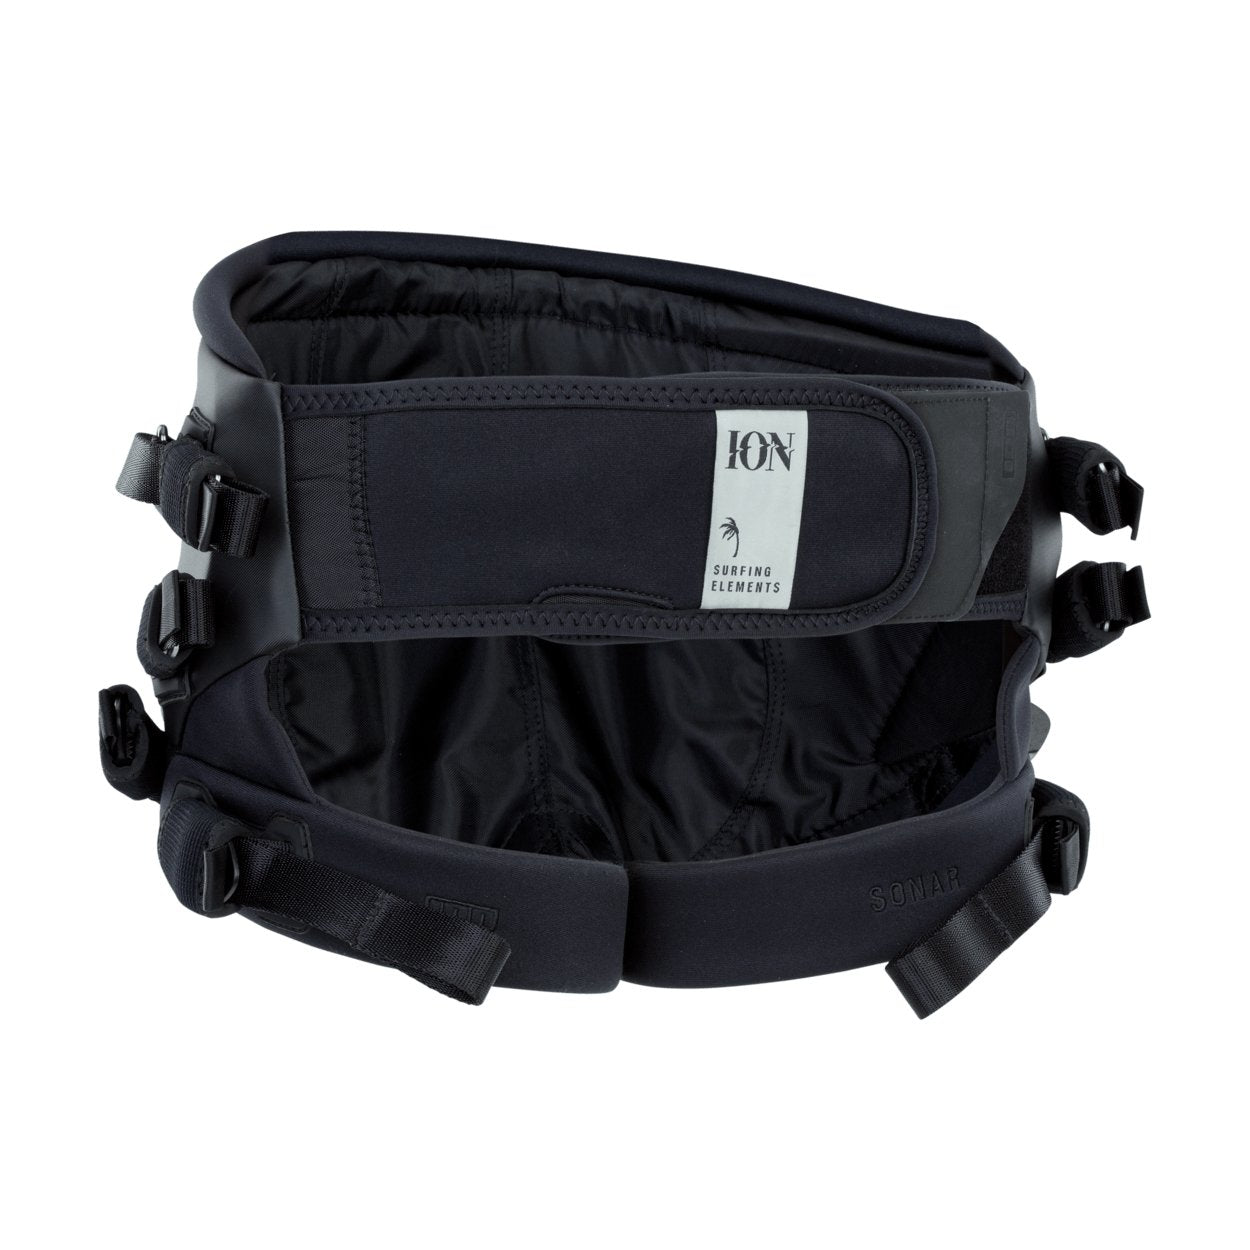 ION Sonar 2021 - Worthing Watersports - 9008415965182 - Harness - ION Water